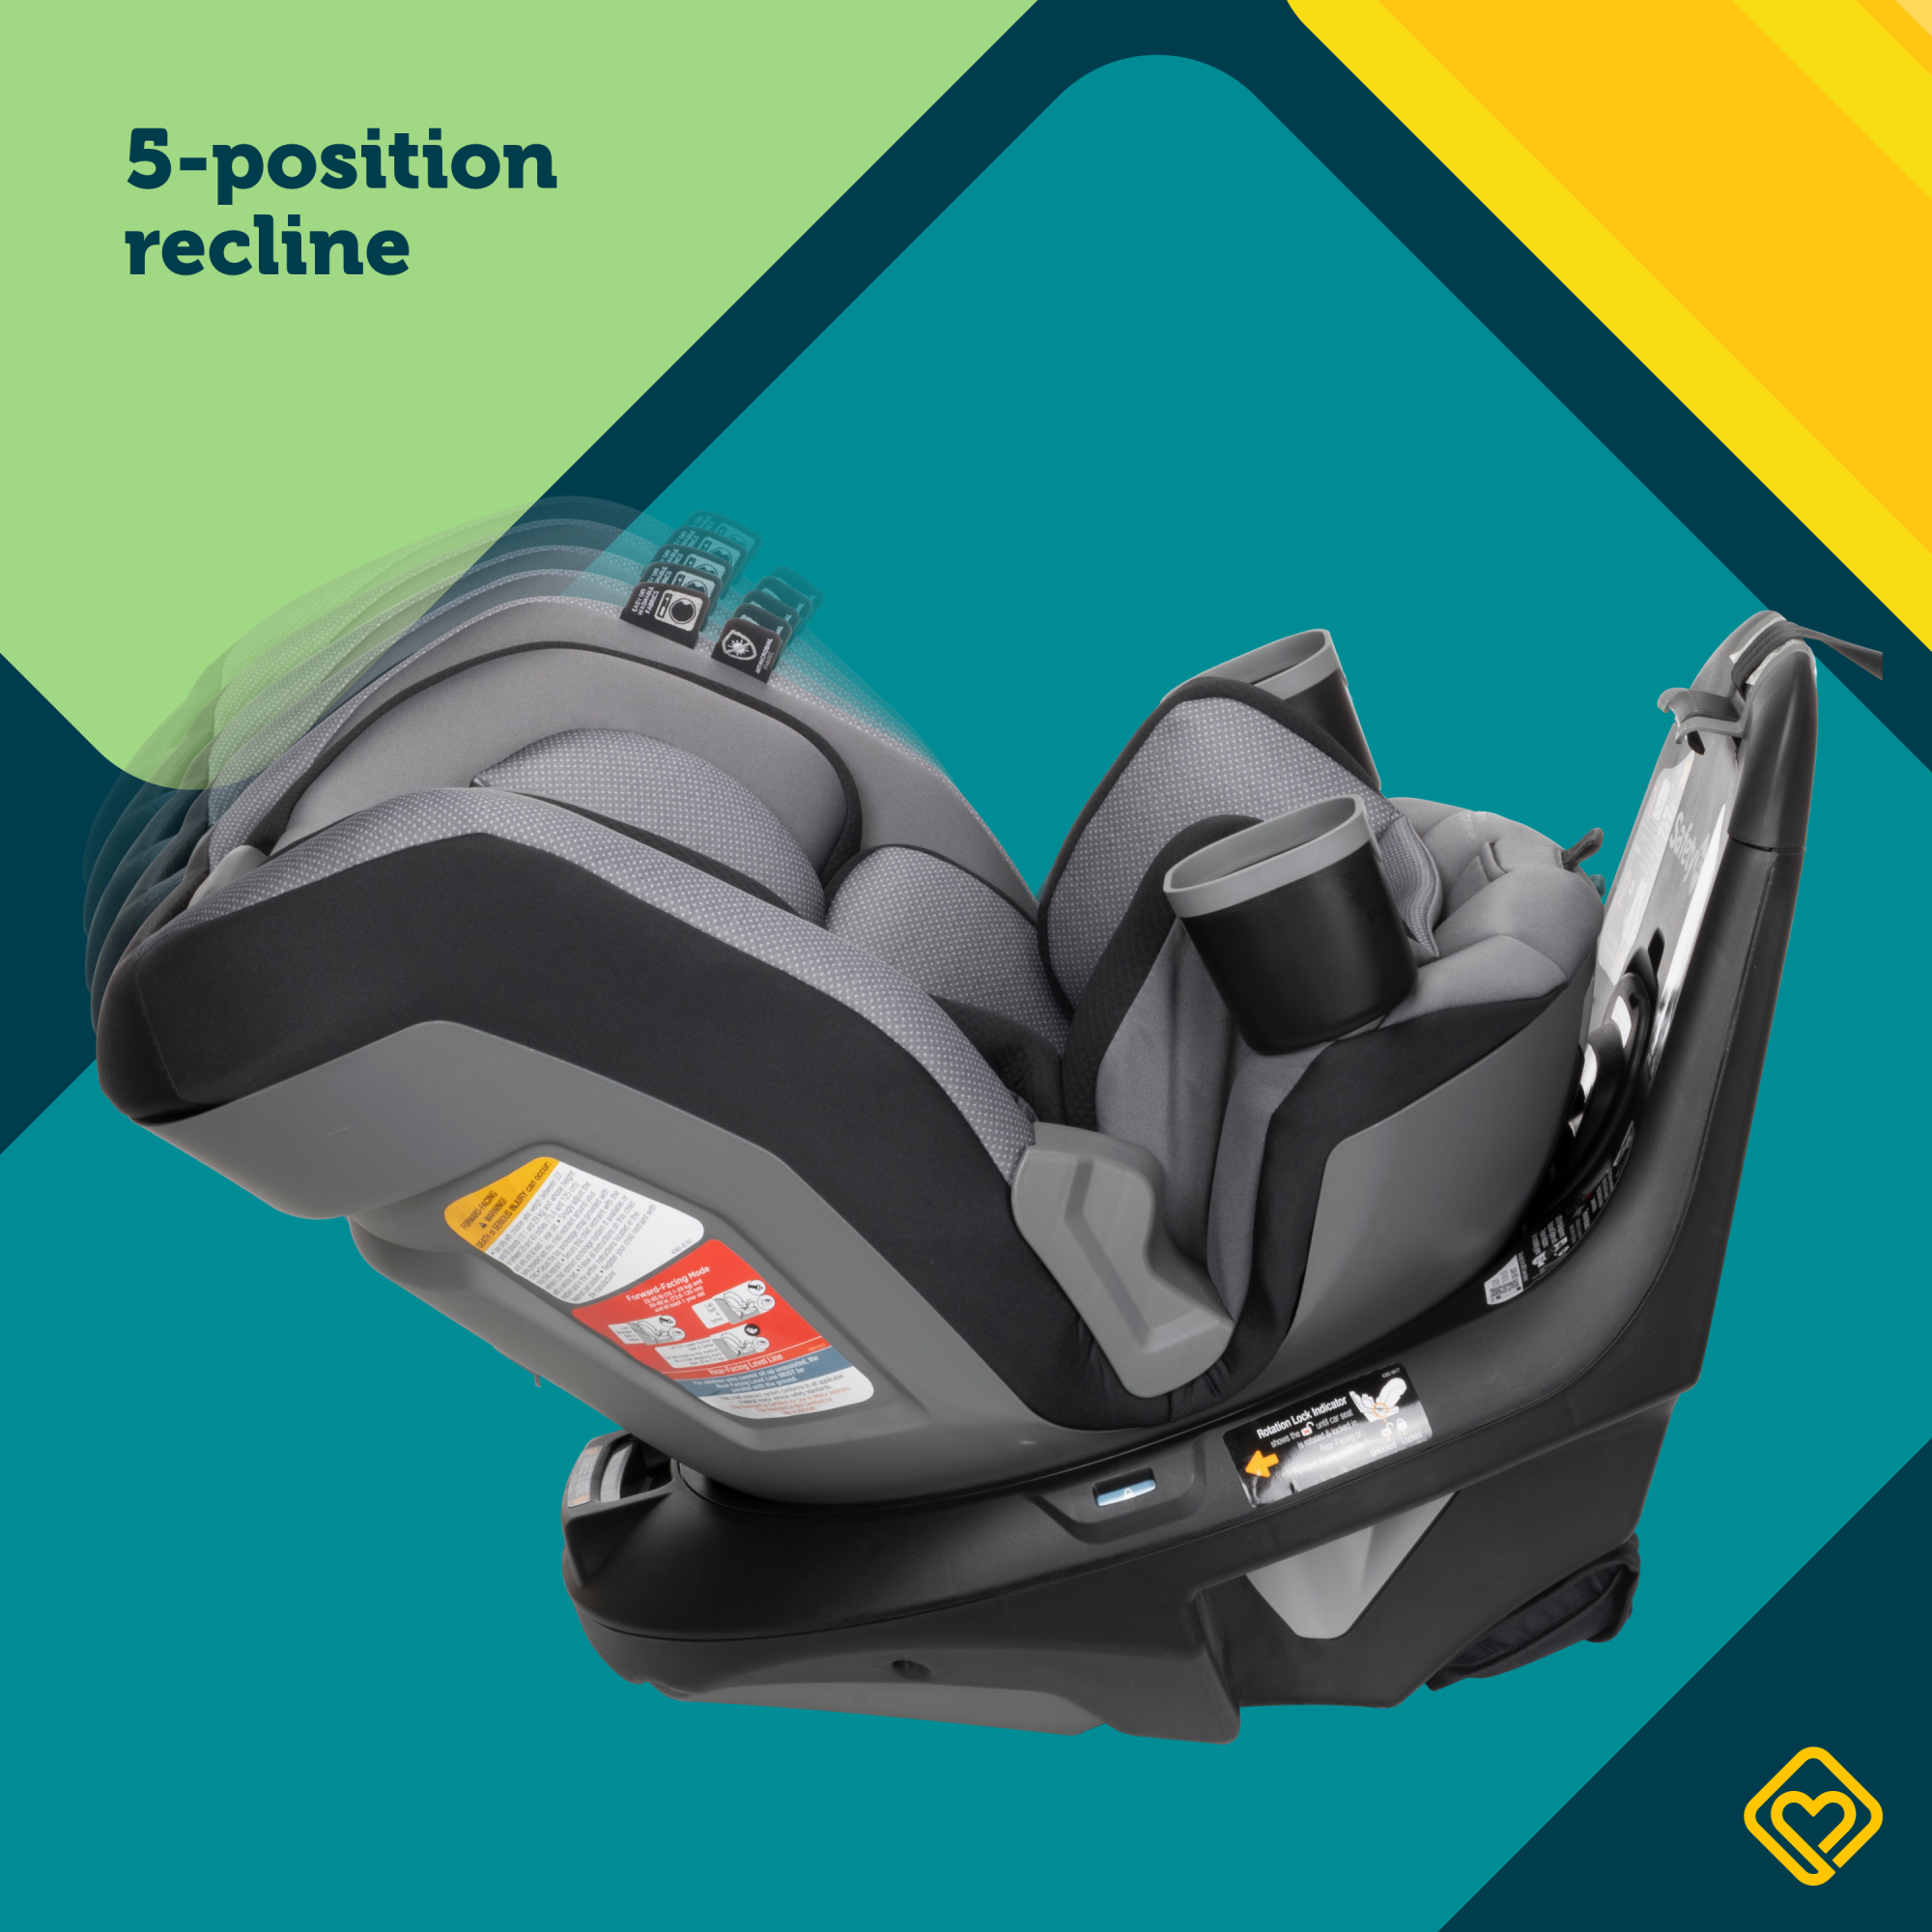 Turn and Go 360 DLX Rotating All-in-One Convertible Car Seat - all-in-one with 3 modes of use: rear-facing 5-40 lbs.; forward-facing 22-65 lbs.; belt-positioning booster 40-100 lbs.